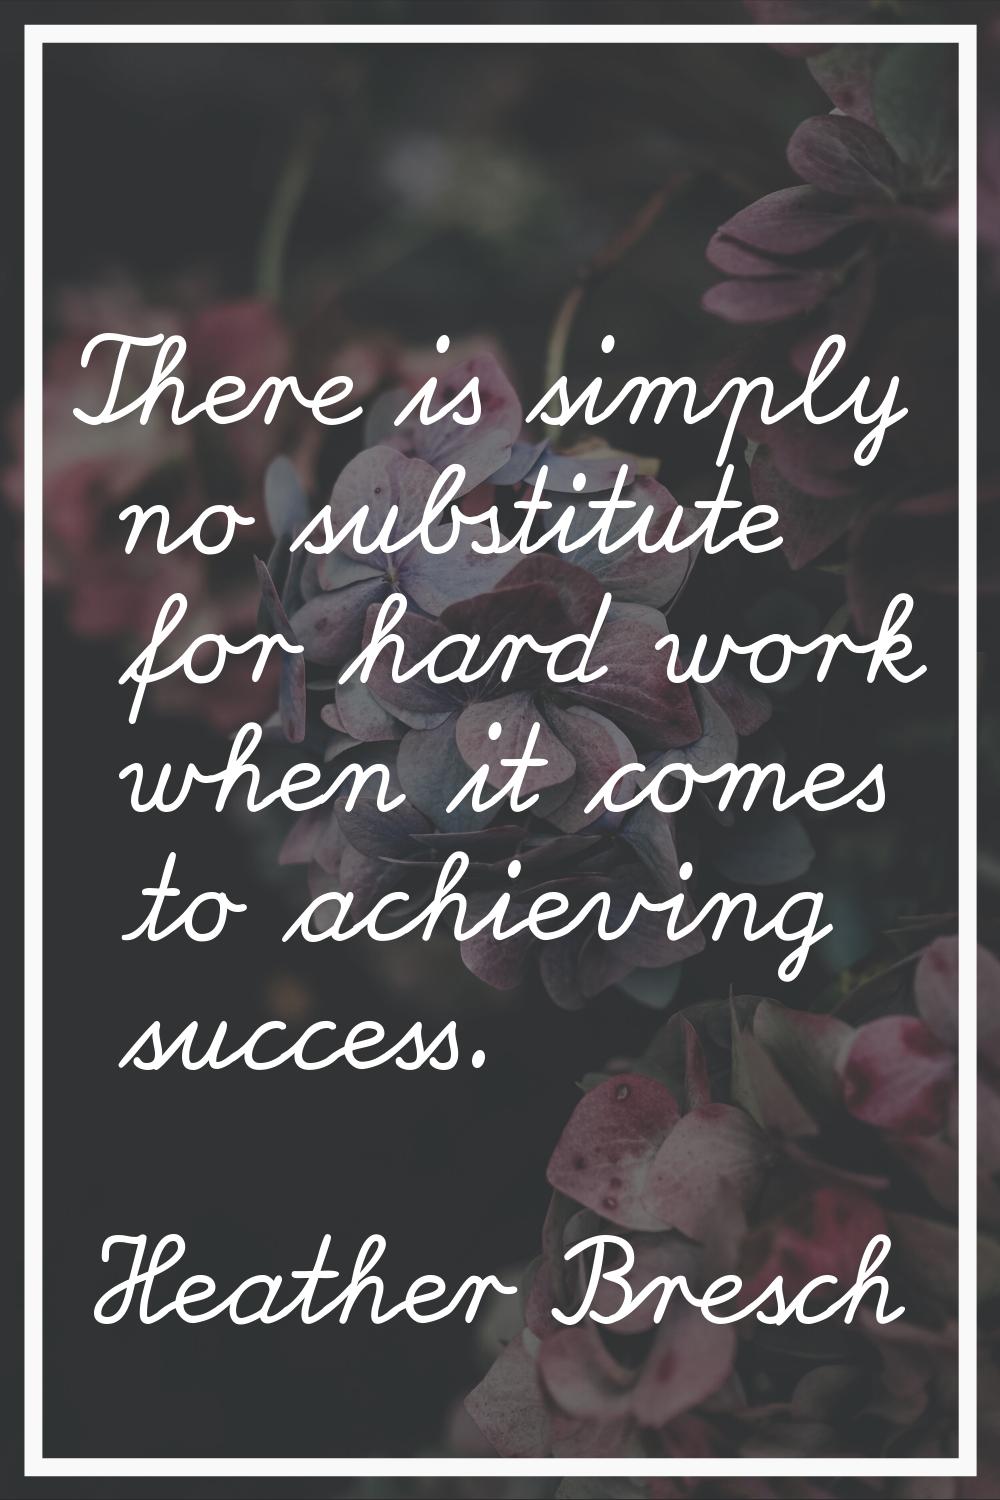 There is simply no substitute for hard work when it comes to achieving success.